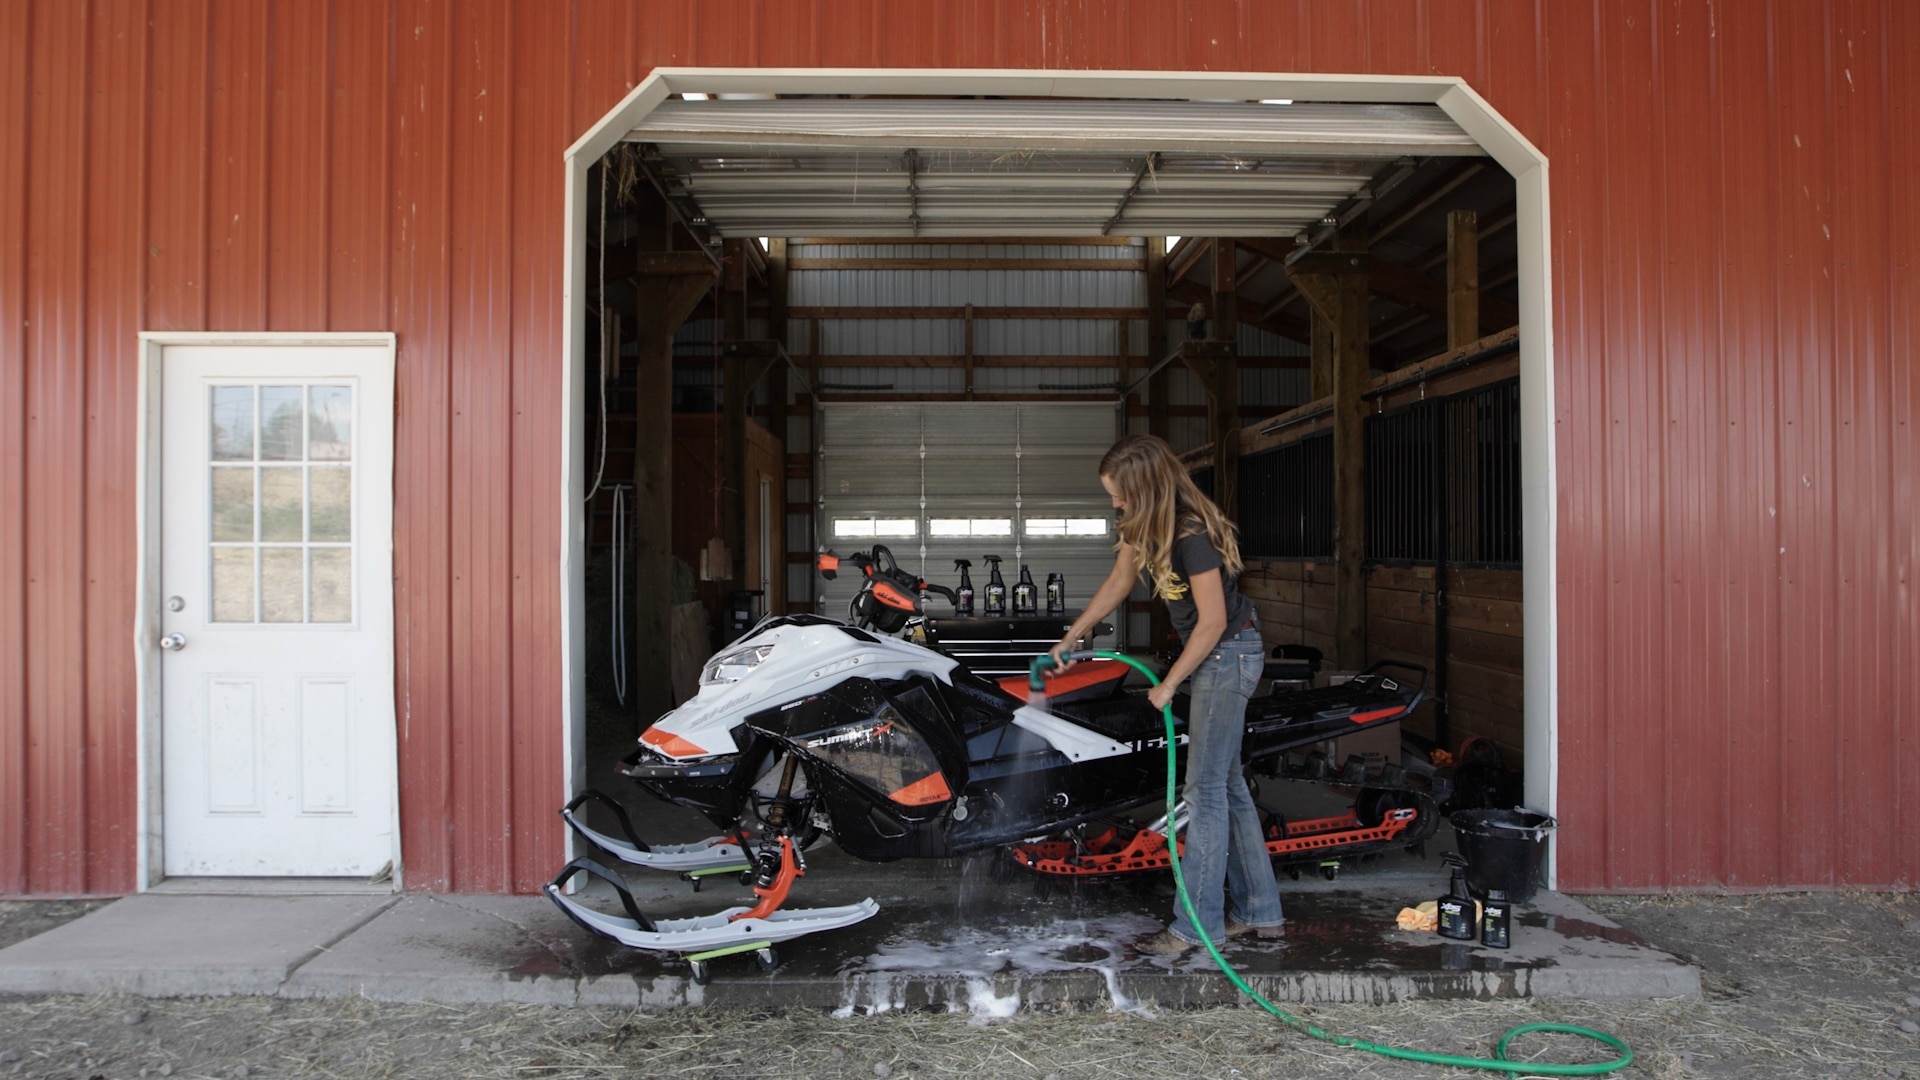 HOW DO I STORE MY SKI-DOO SNOWMOBILE FOR THE SUMMER?